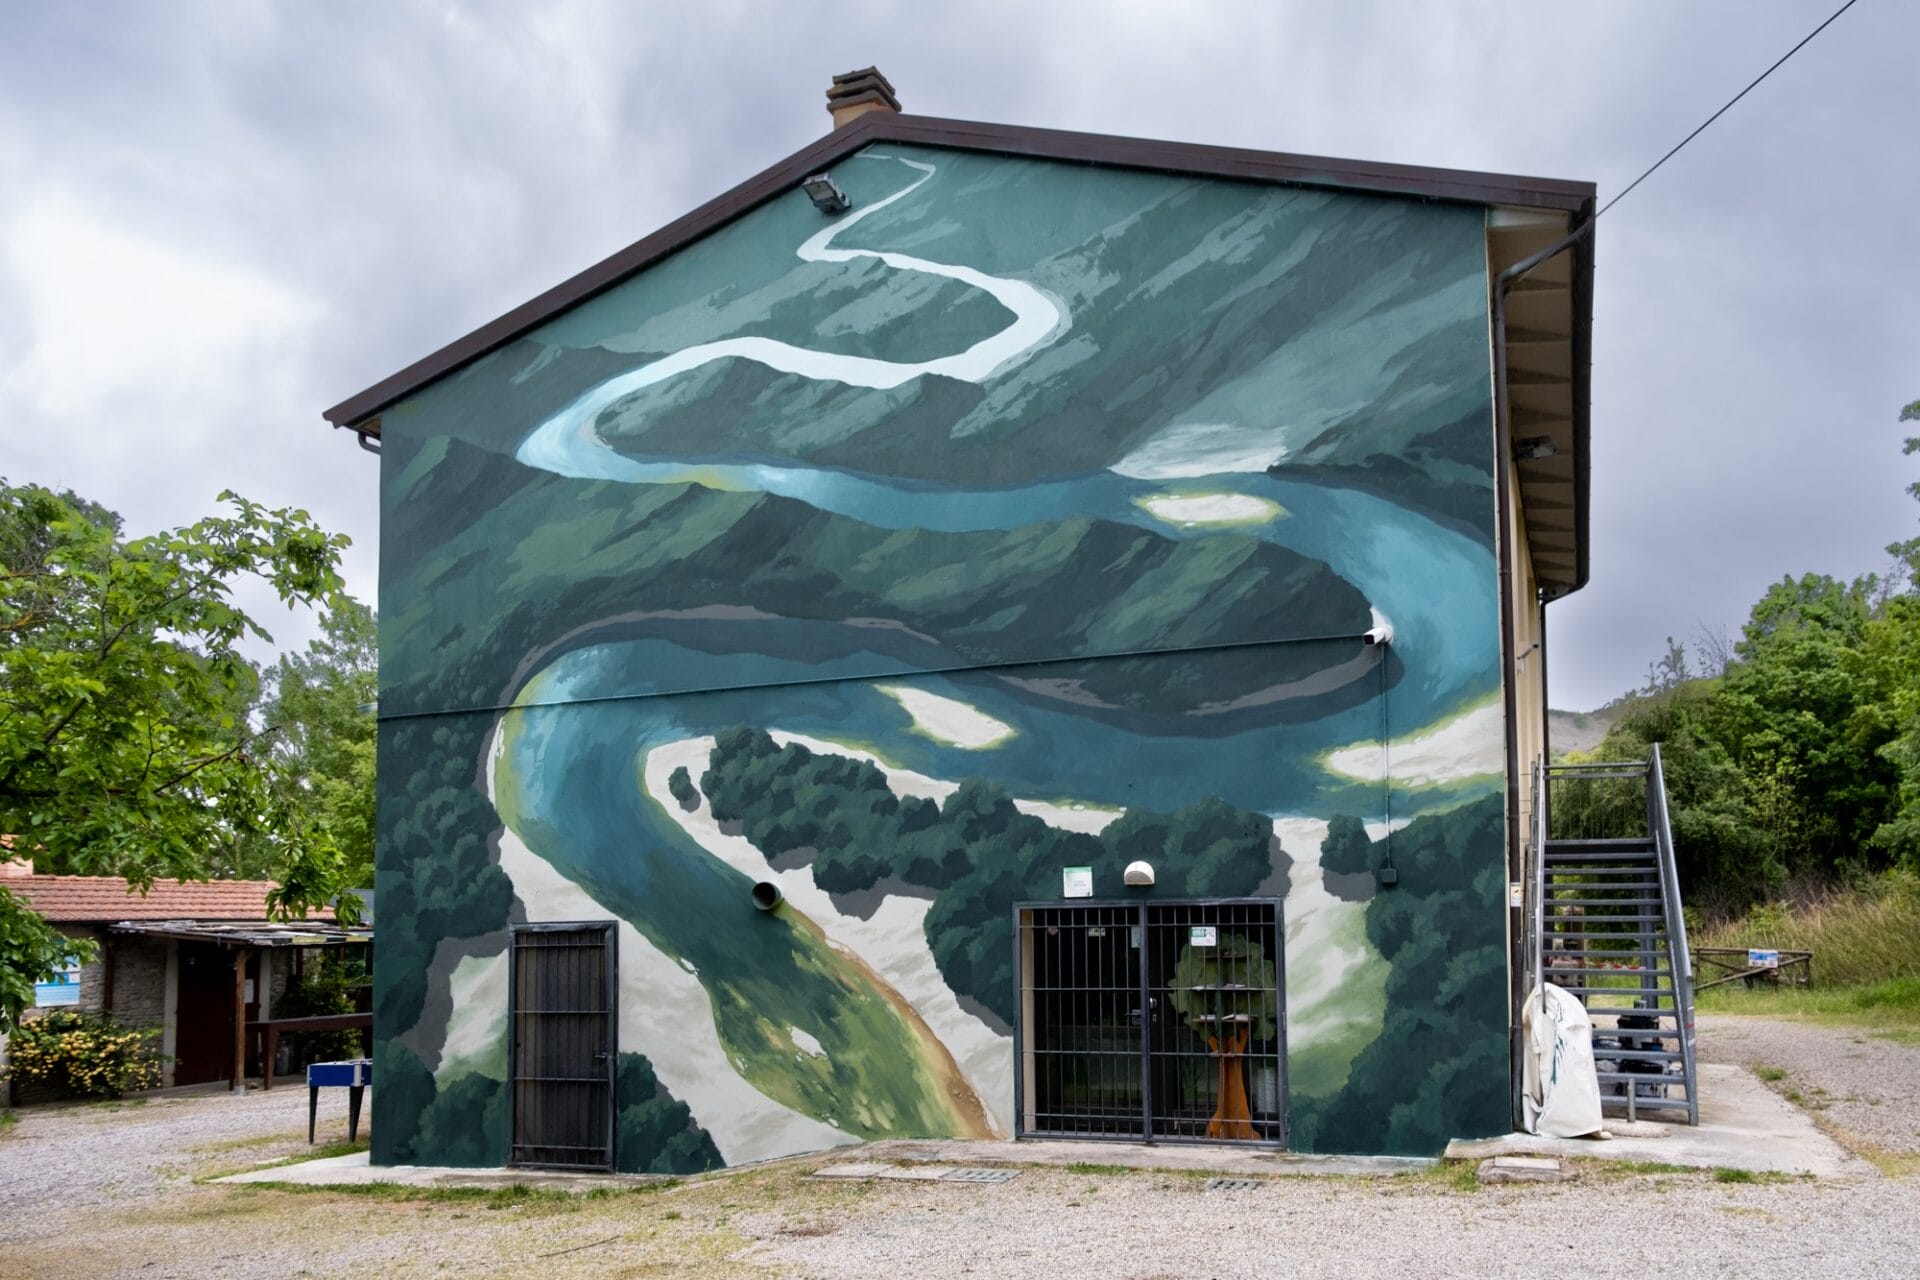 a mural on the side of a building showing a river coursing through some mountains